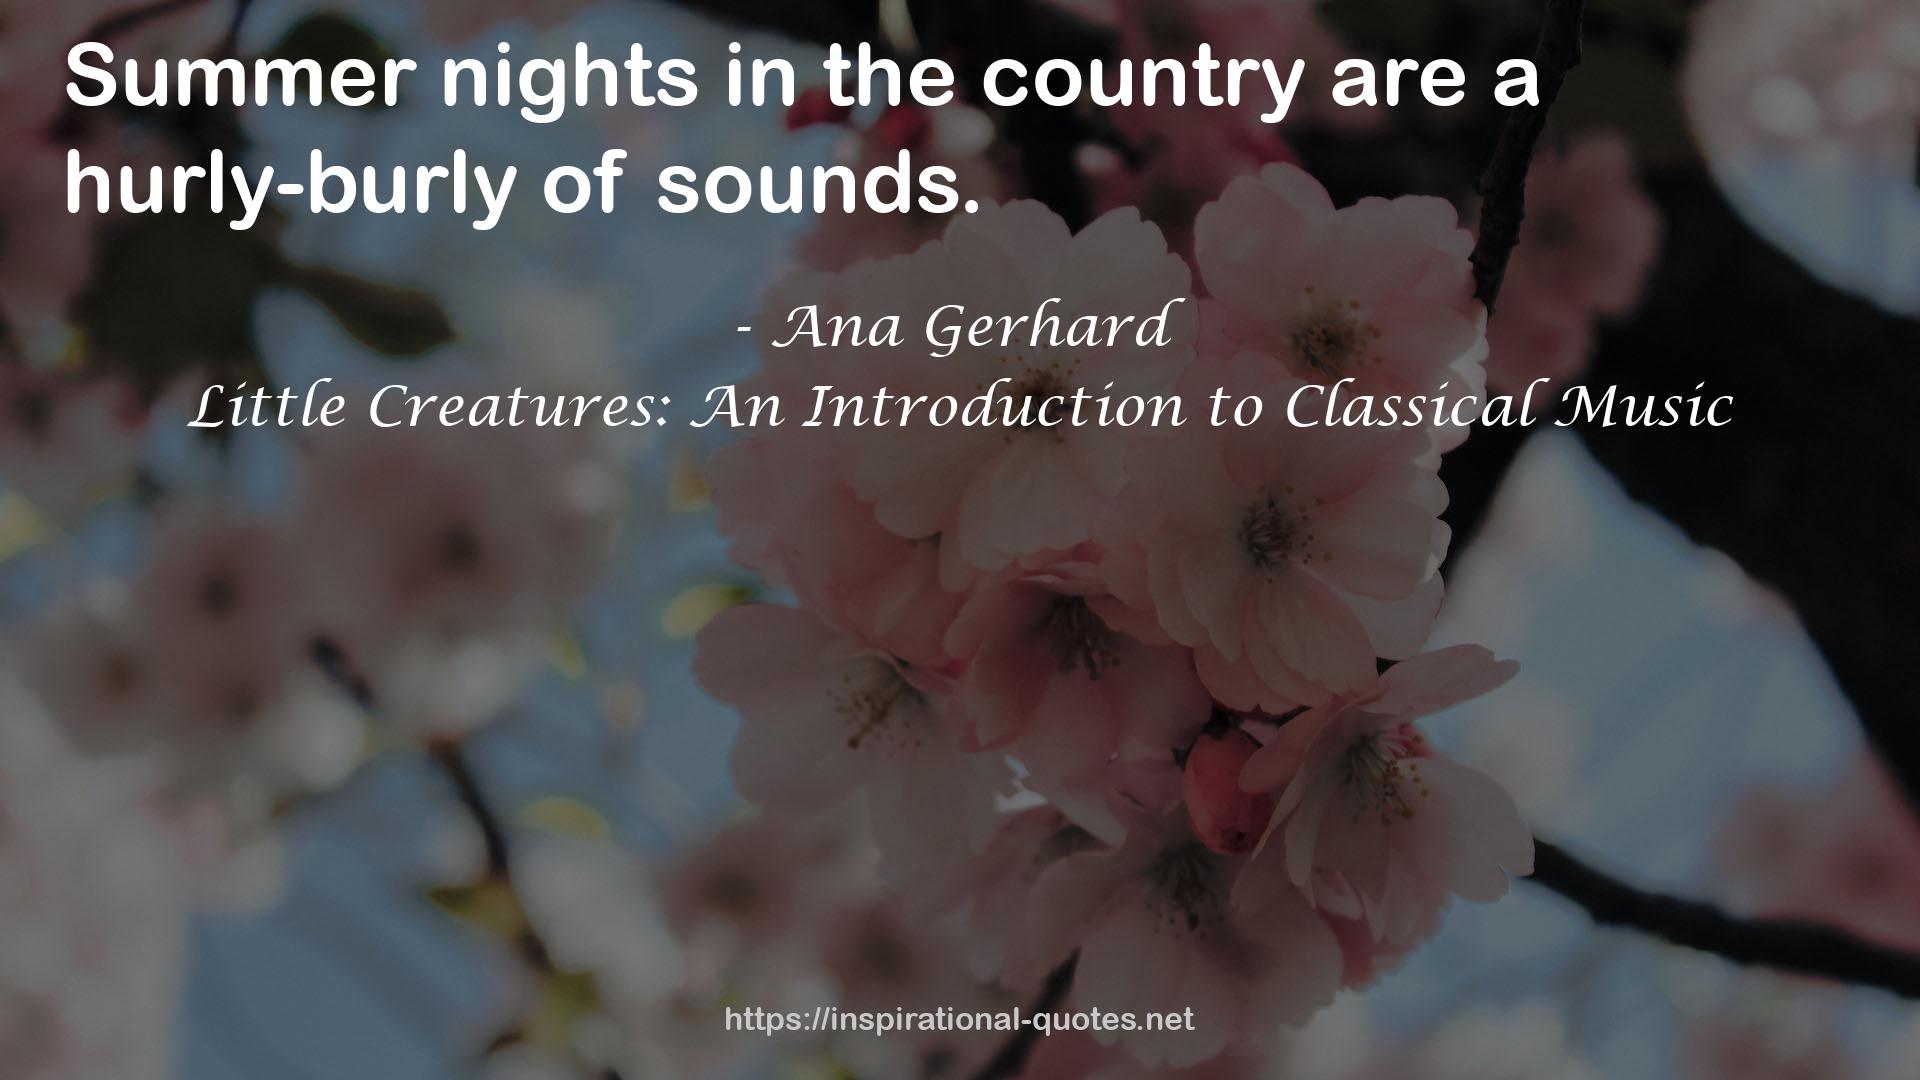 Little Creatures: An Introduction to Classical Music QUOTES